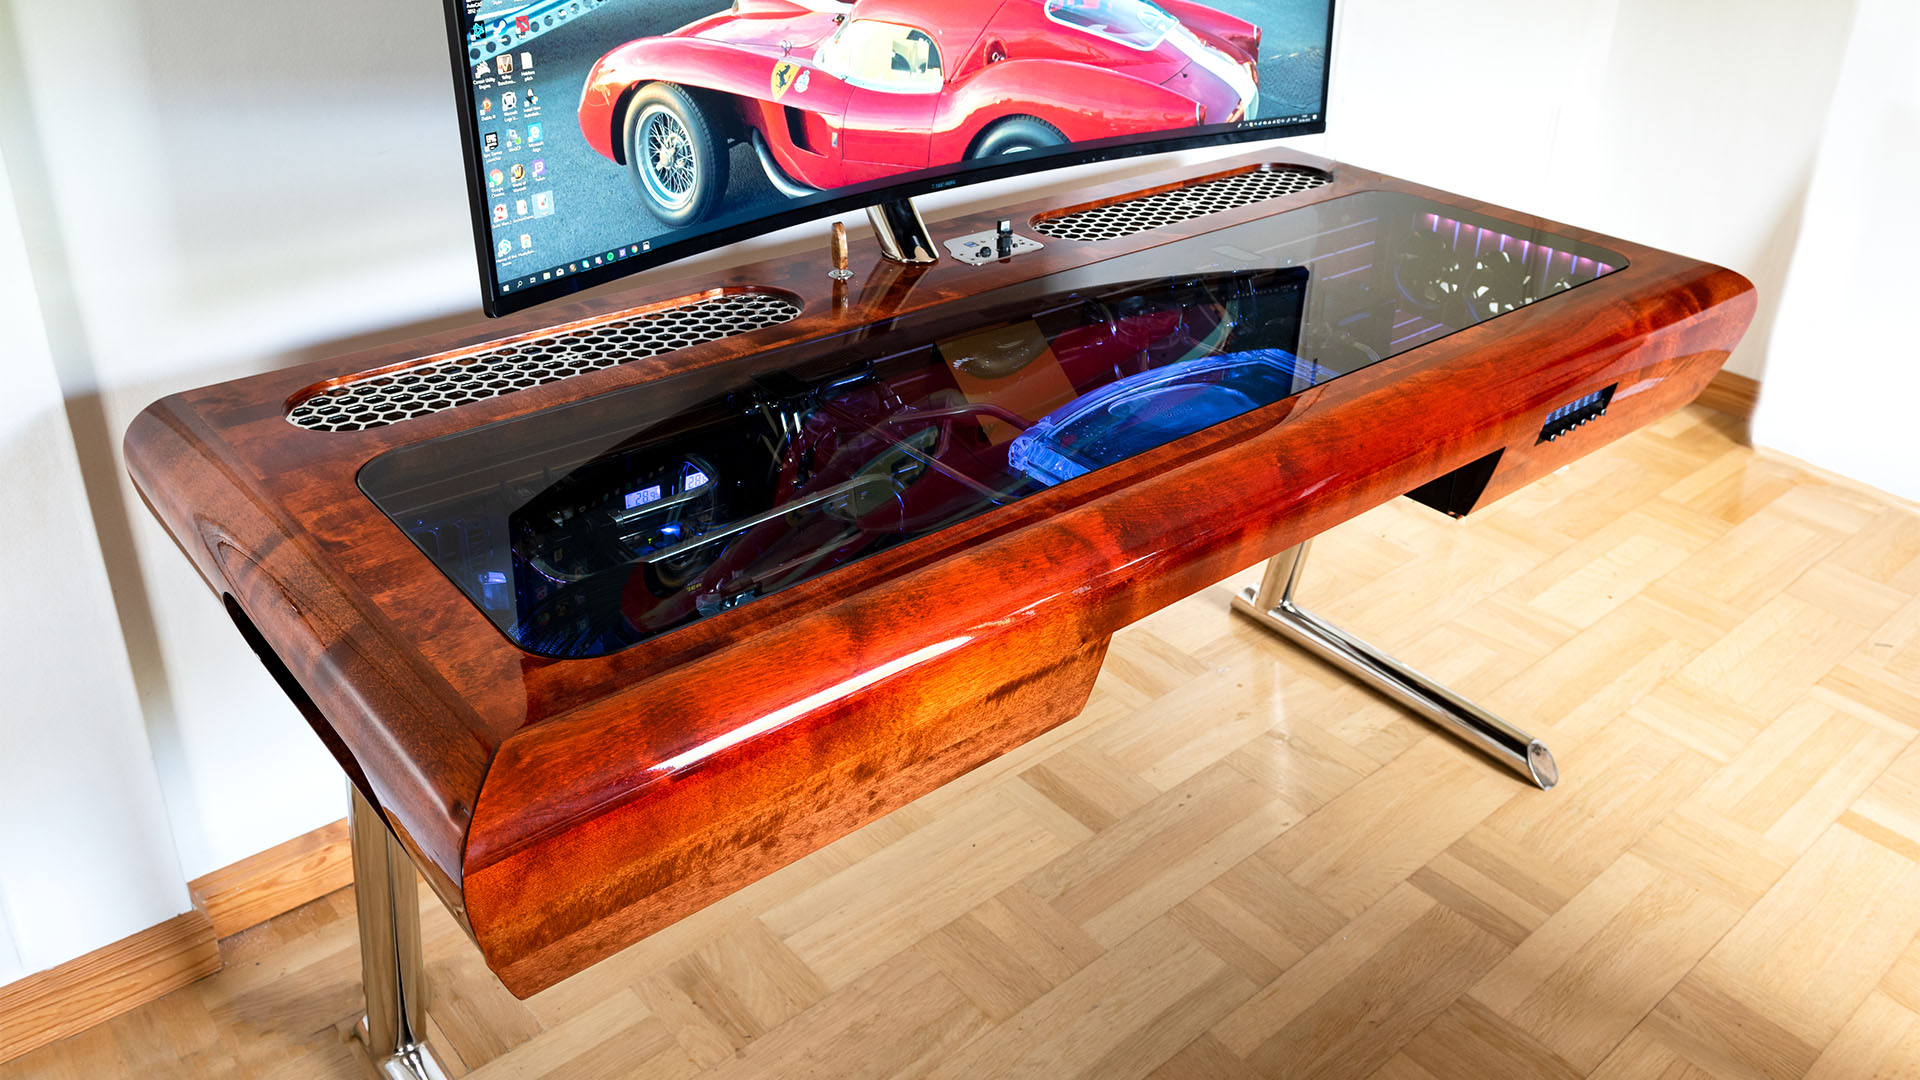 It took four years to build this shiny wood desk PC